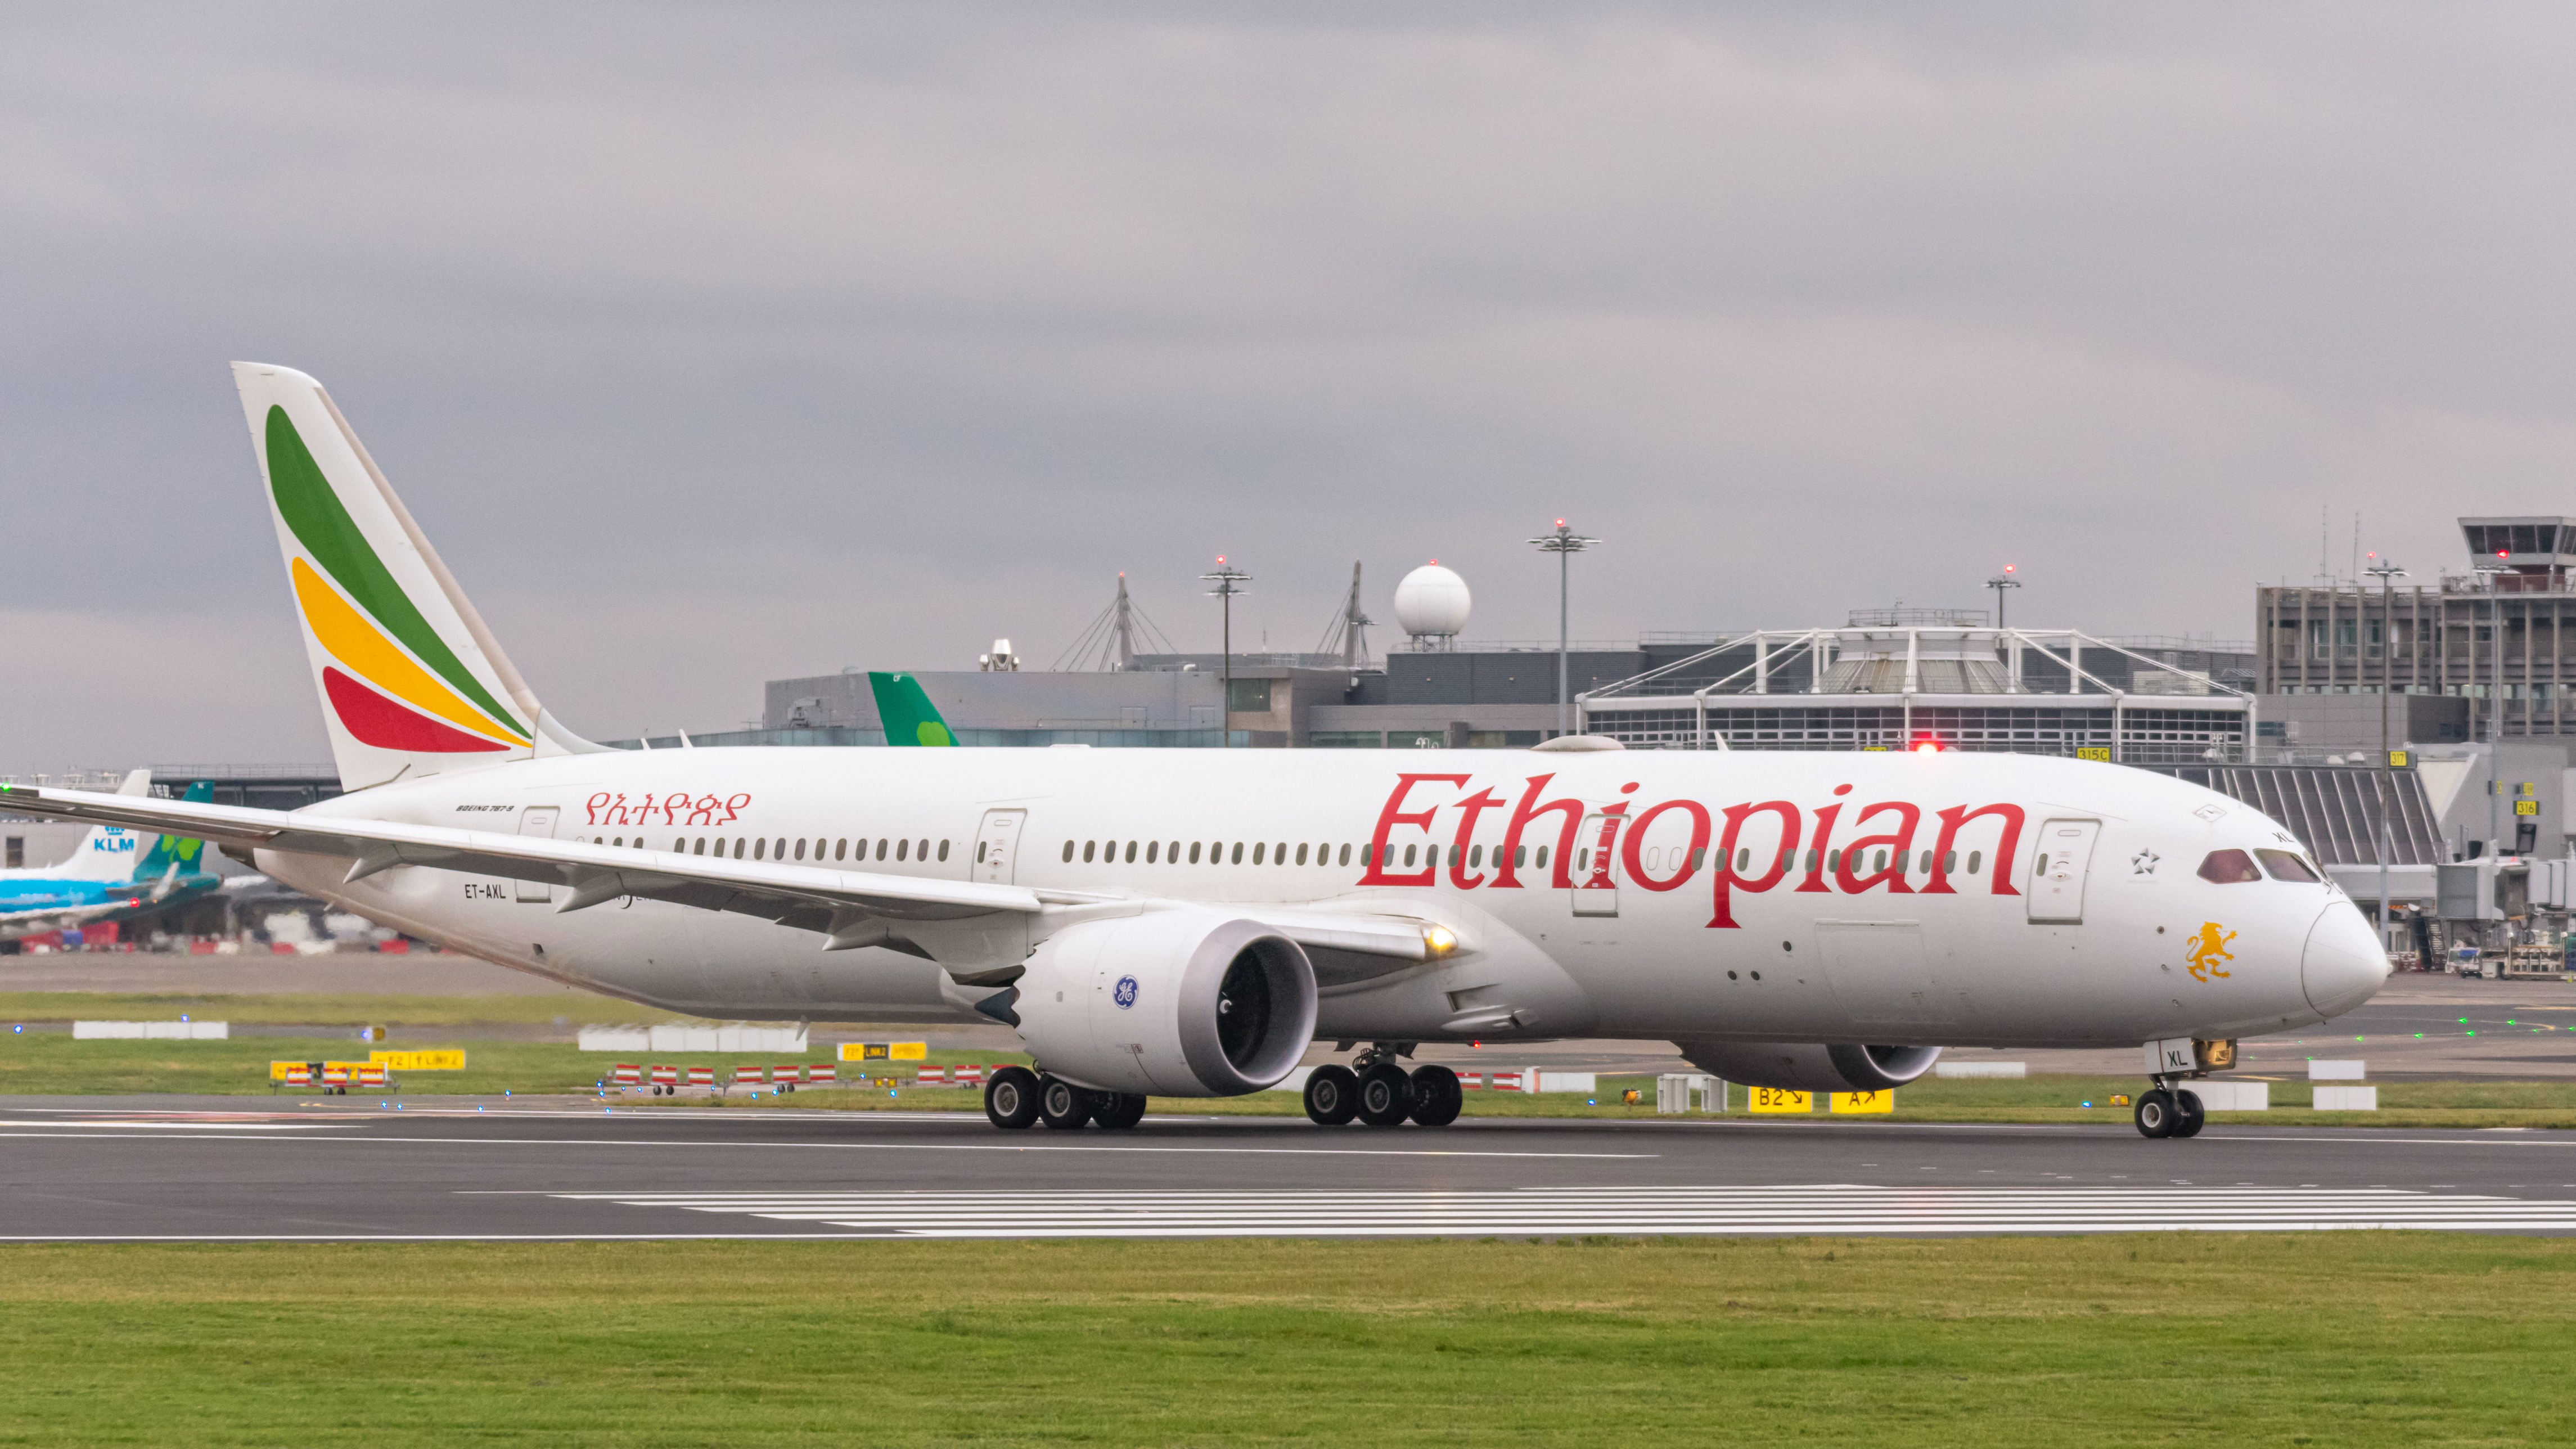 ethiopian swaps dublin for rome for north american route technical stops